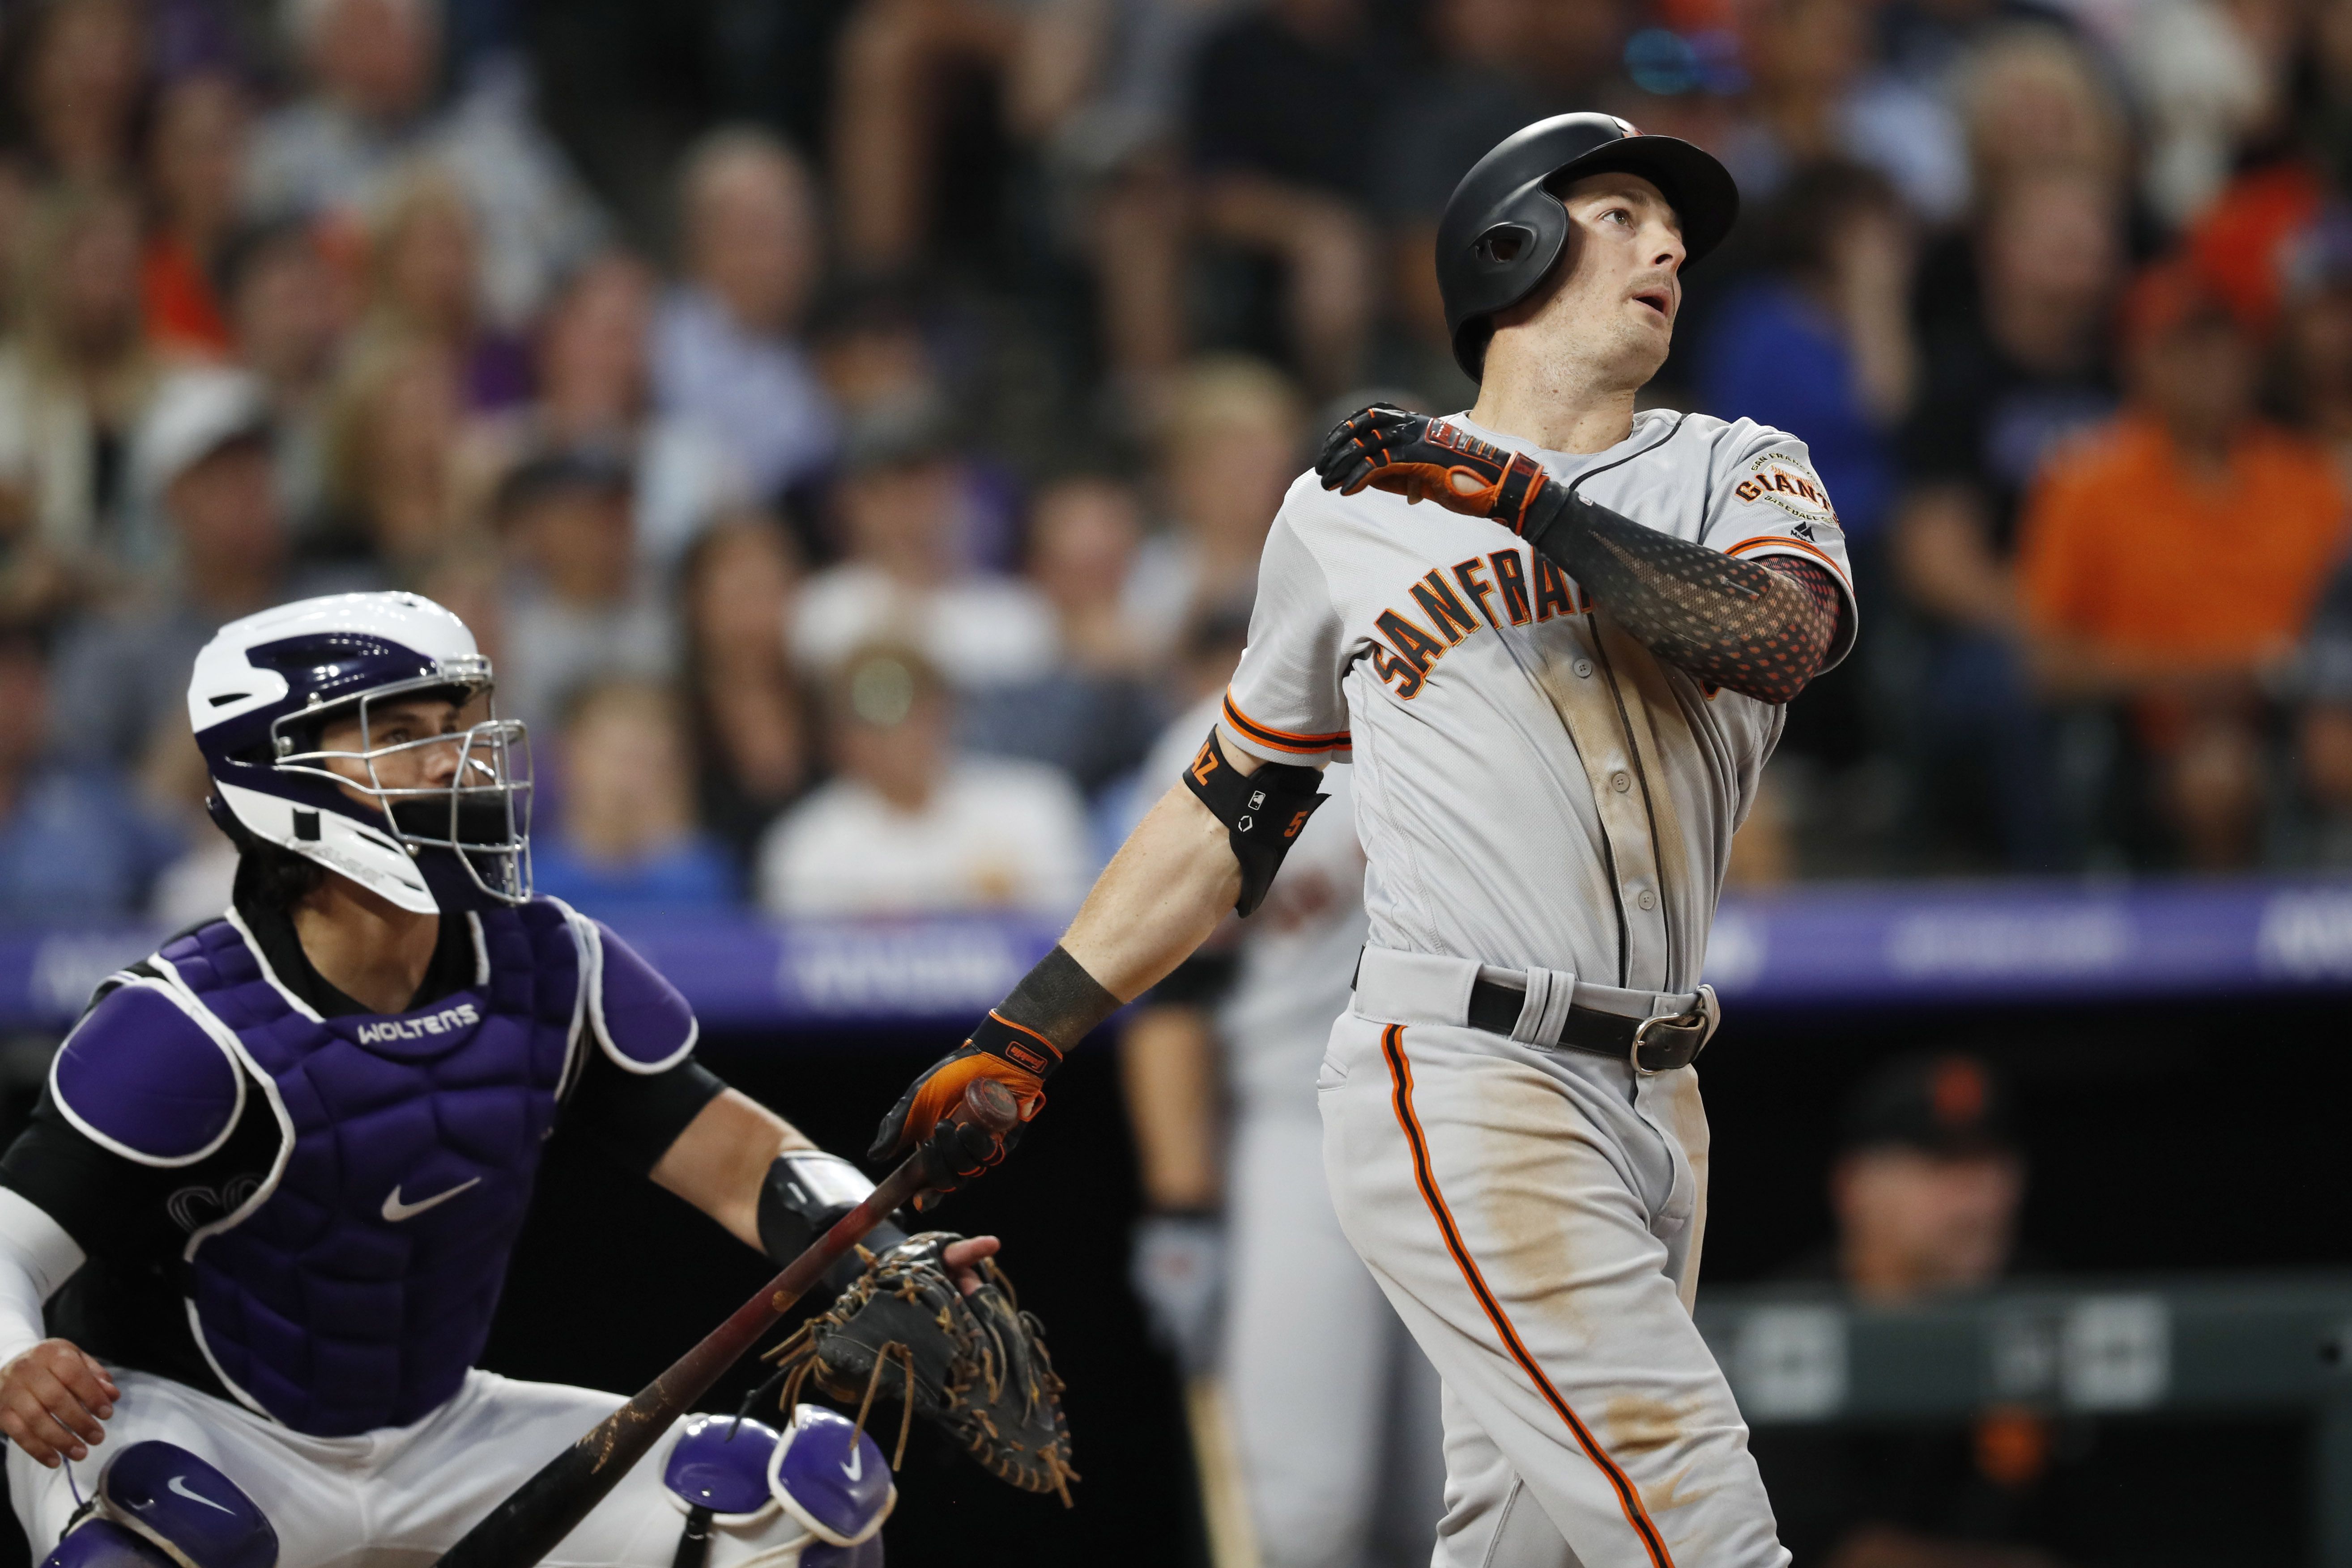 Mike Yastrzemski to play all three of Giants' games at Fenway Park